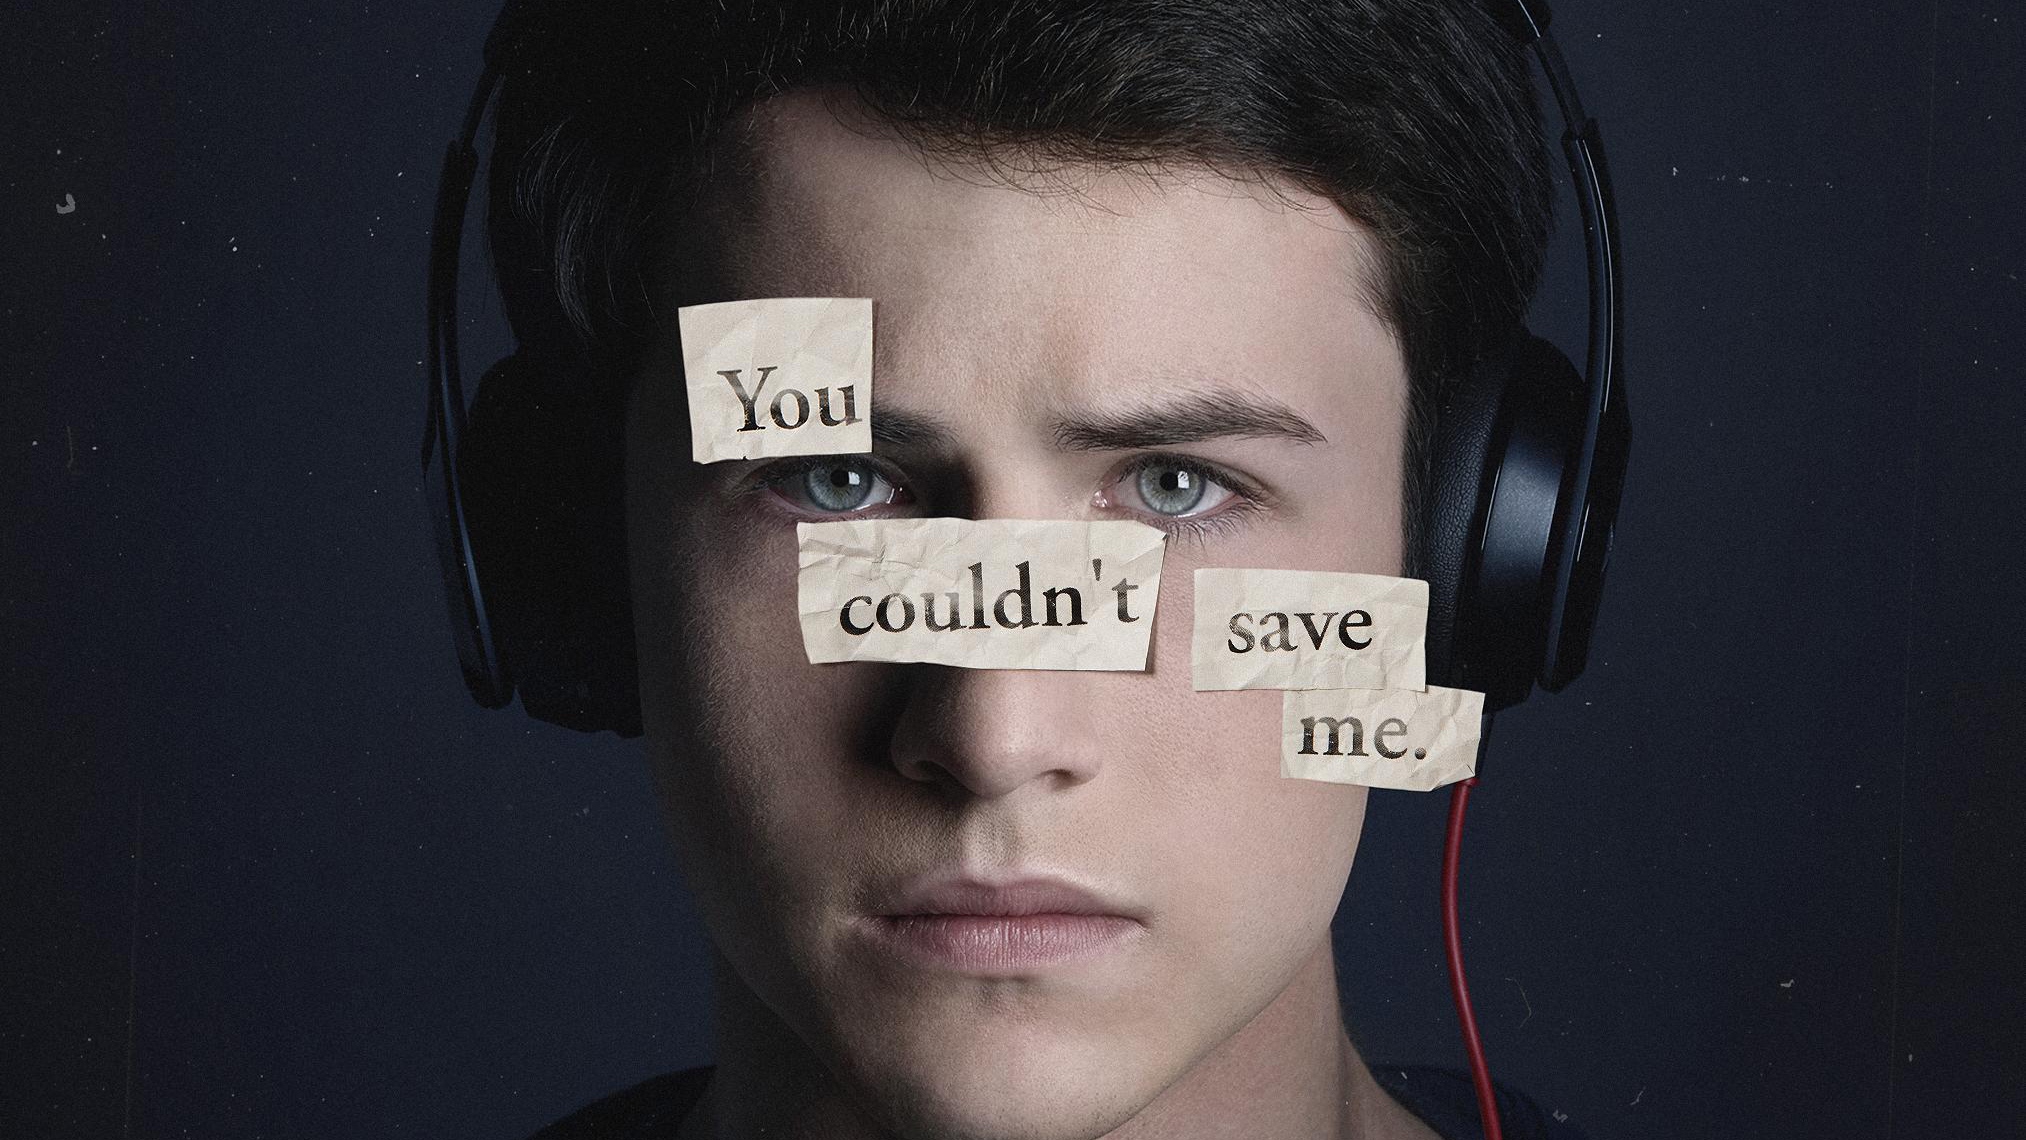 Clay 13 Reasons Why Poster, HD Tv Shows, 4k Wallpapers, Images